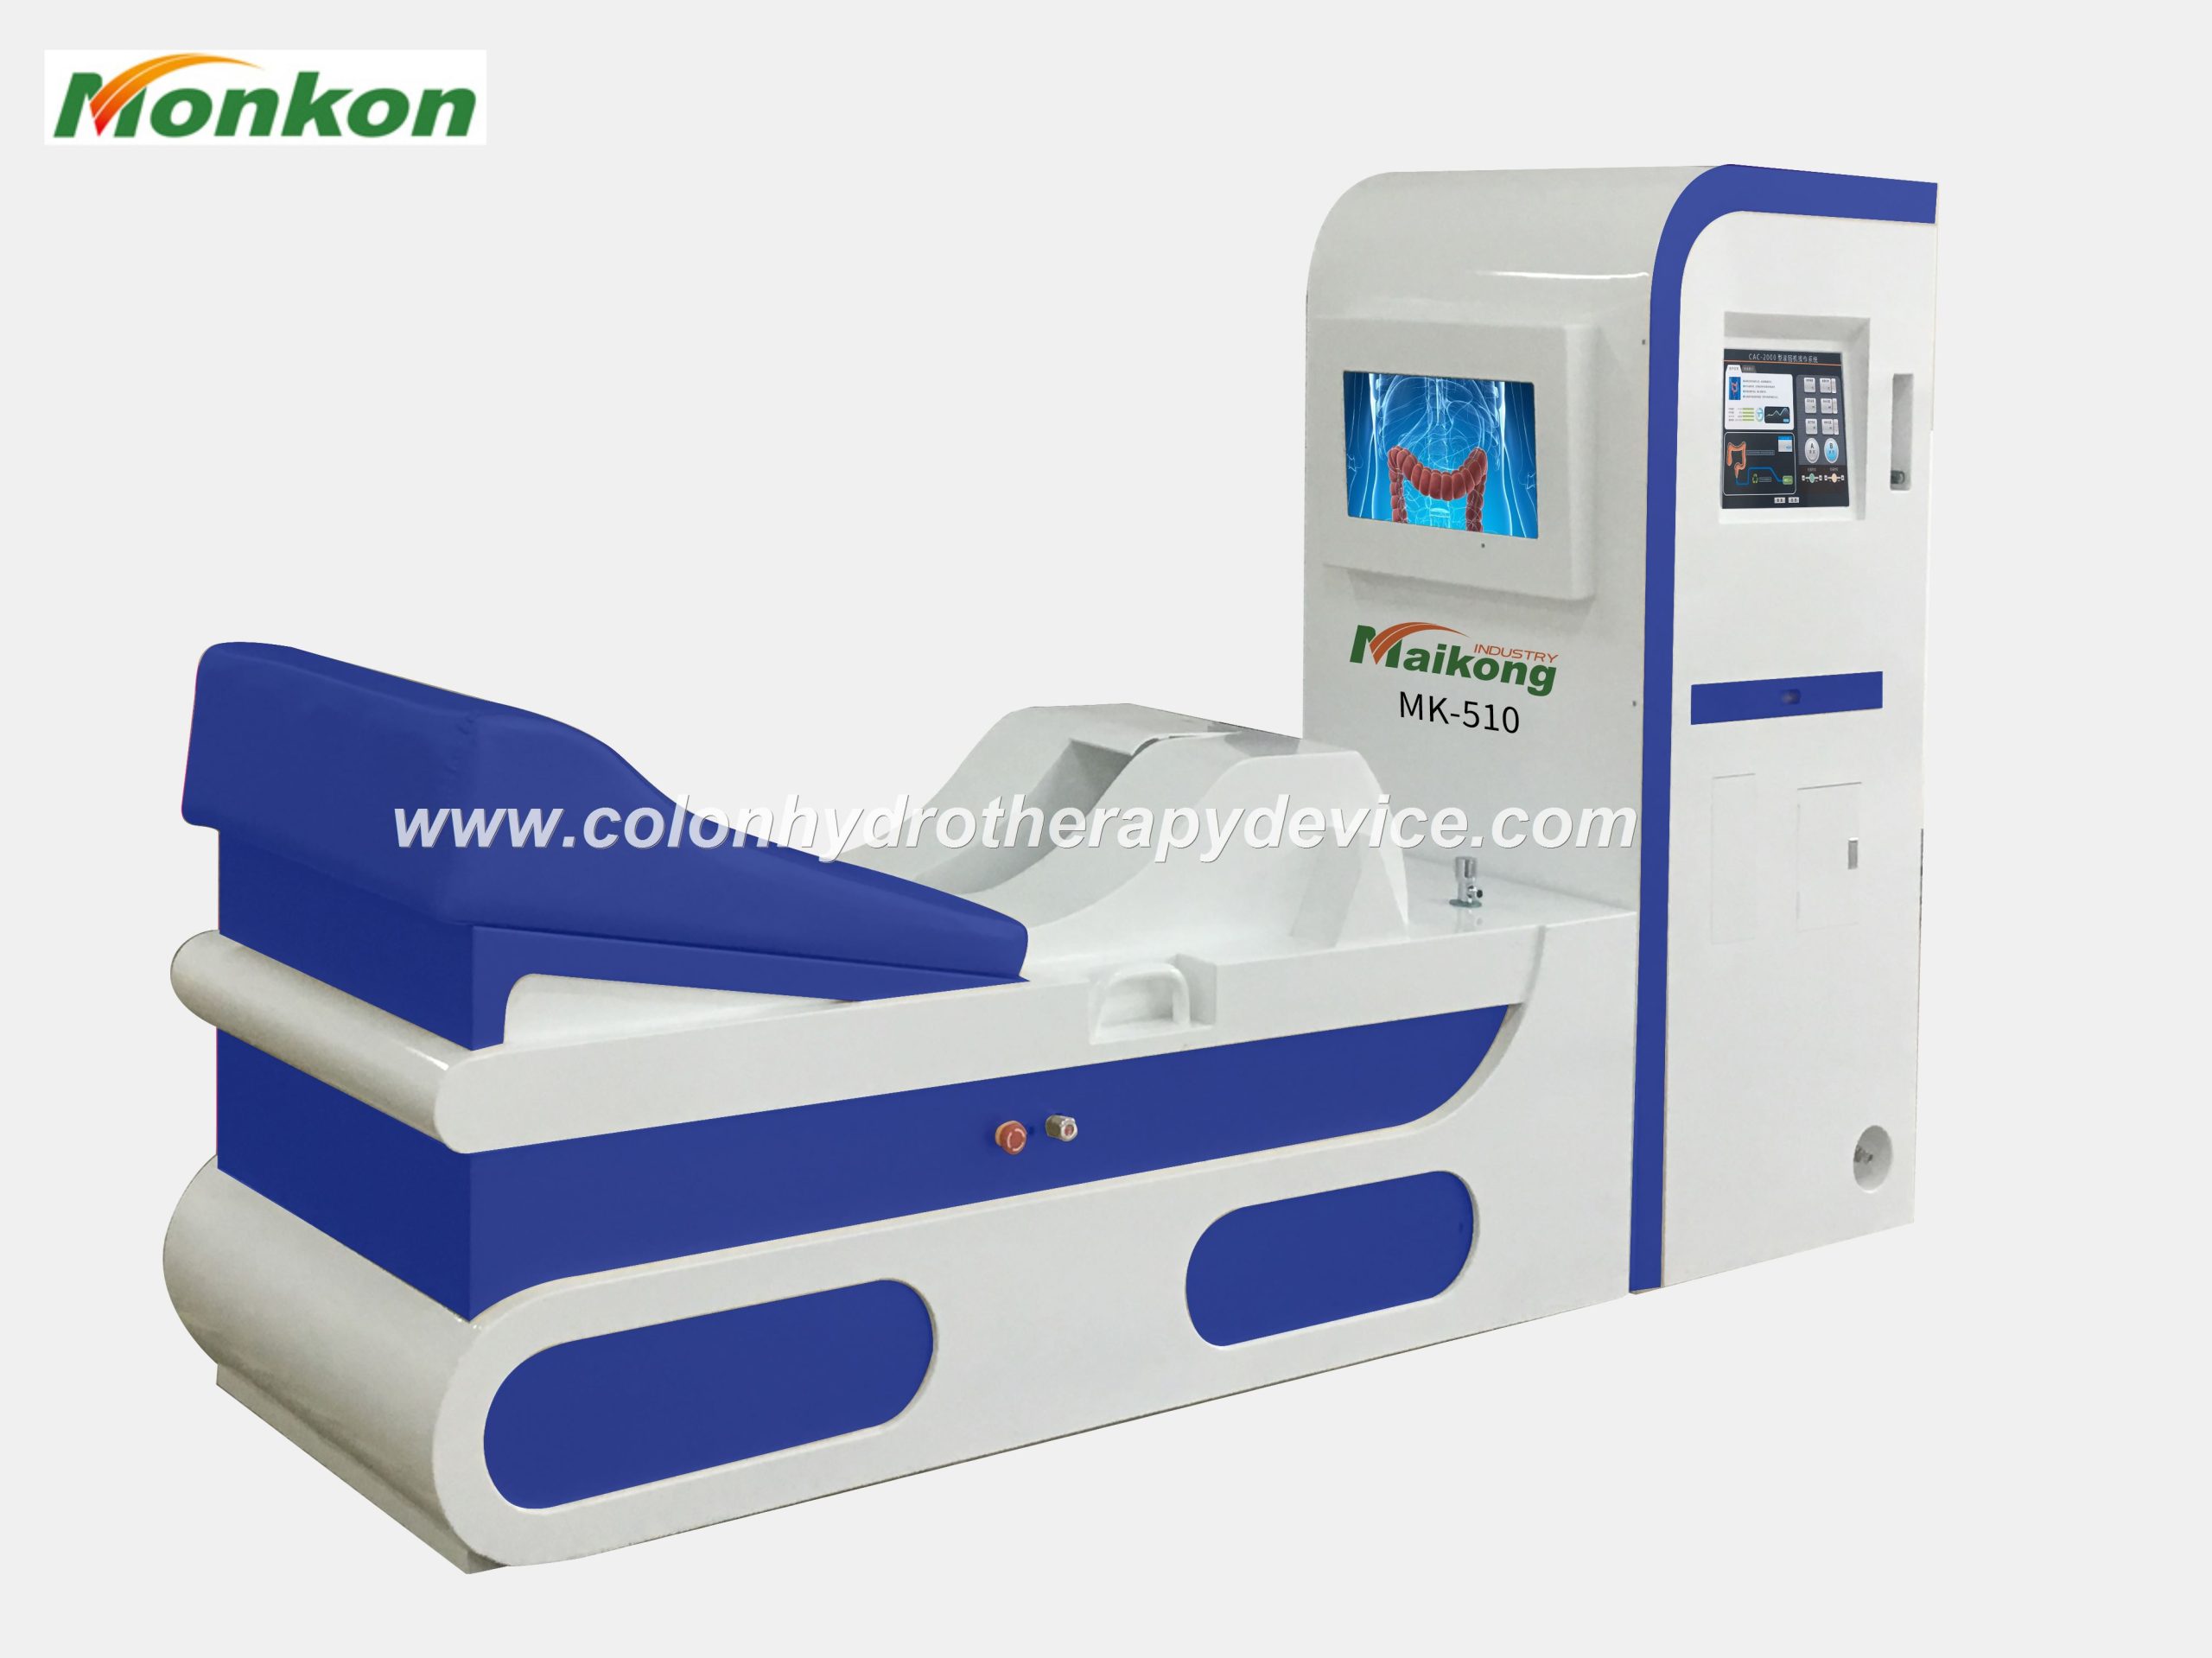 Colon Hydrotherapy Device